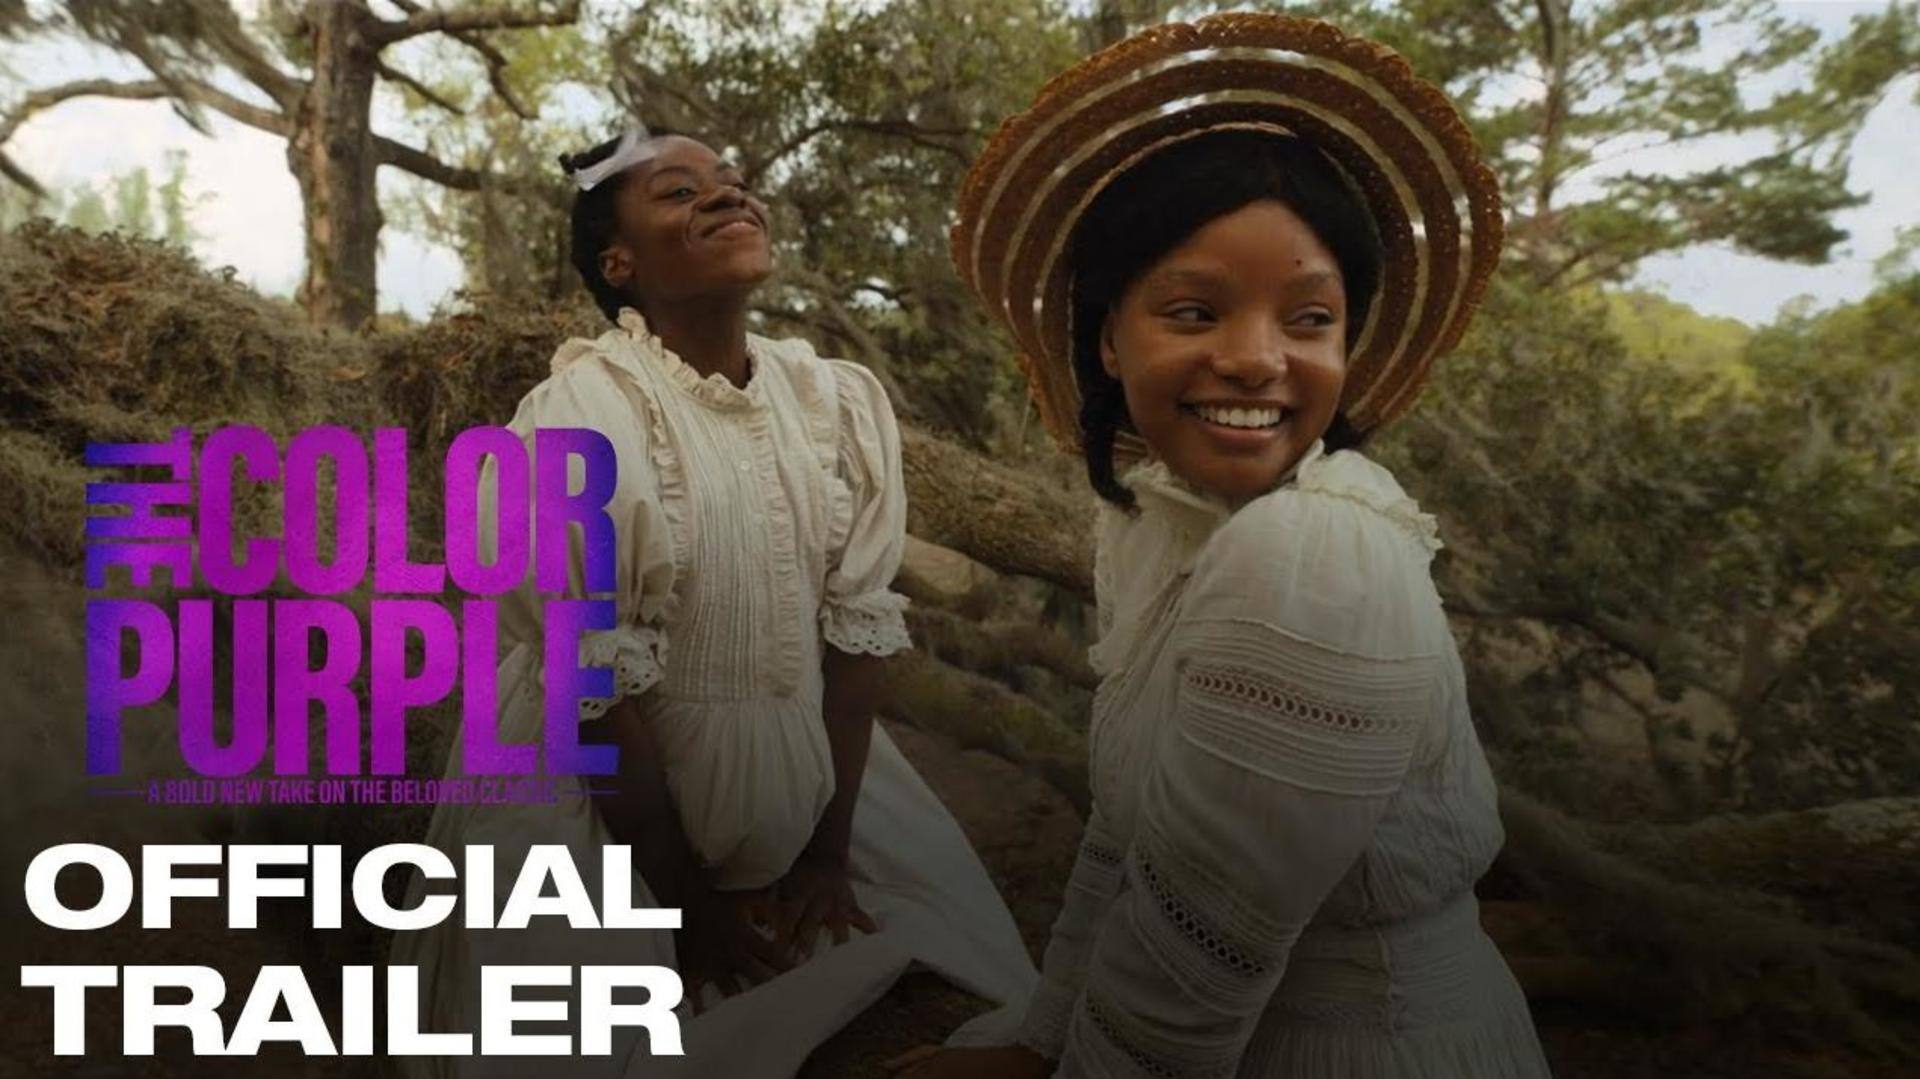 'The Color Purple' trailer: Why the original book was banned